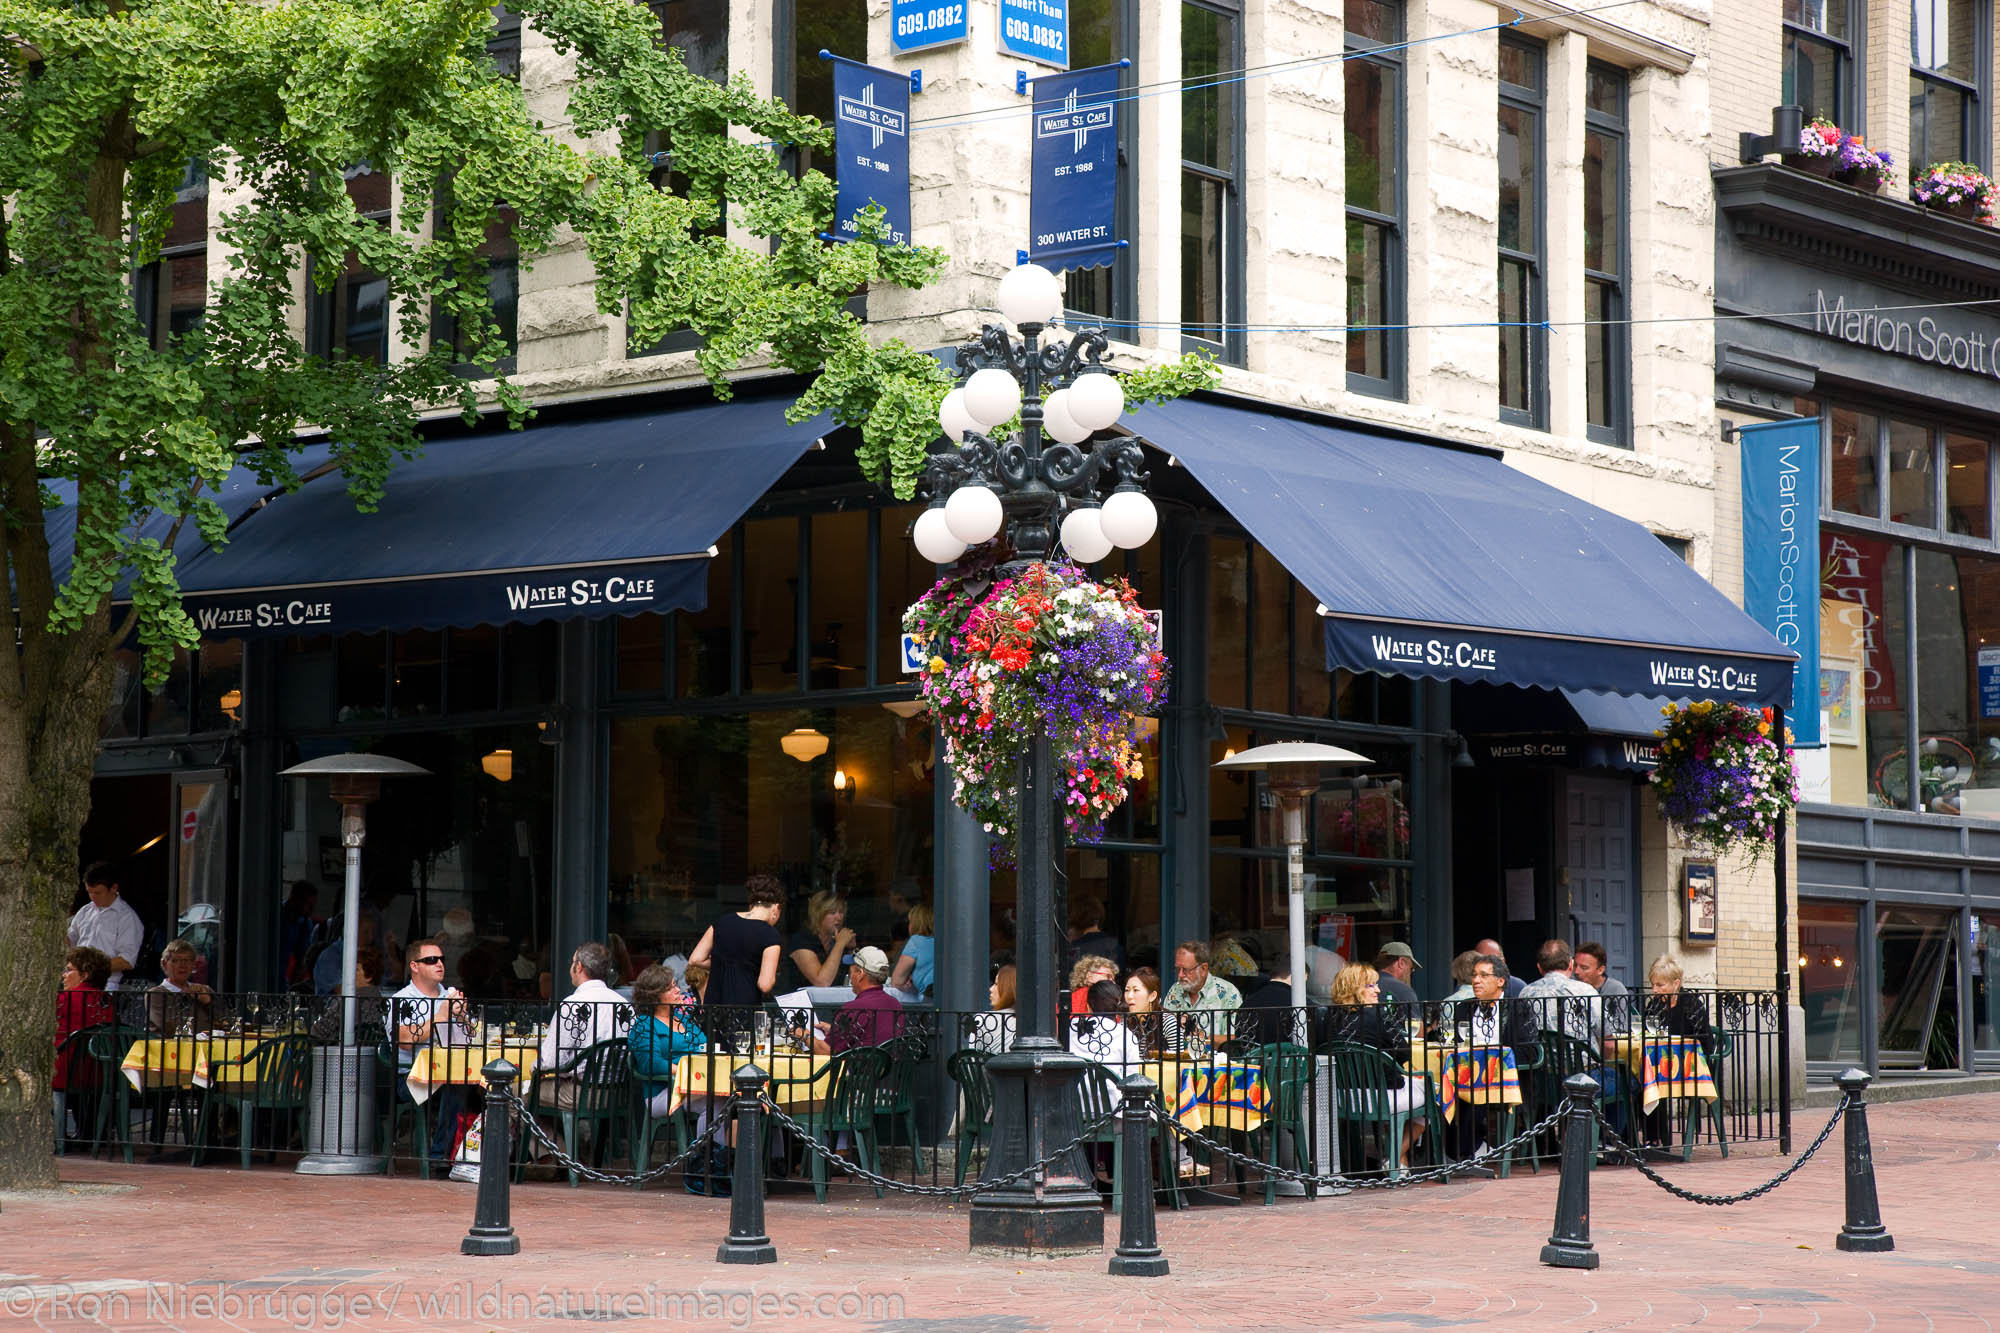 Water Street Cafe, Gastown District, downtown Vancouver, British Columbia, Canada.